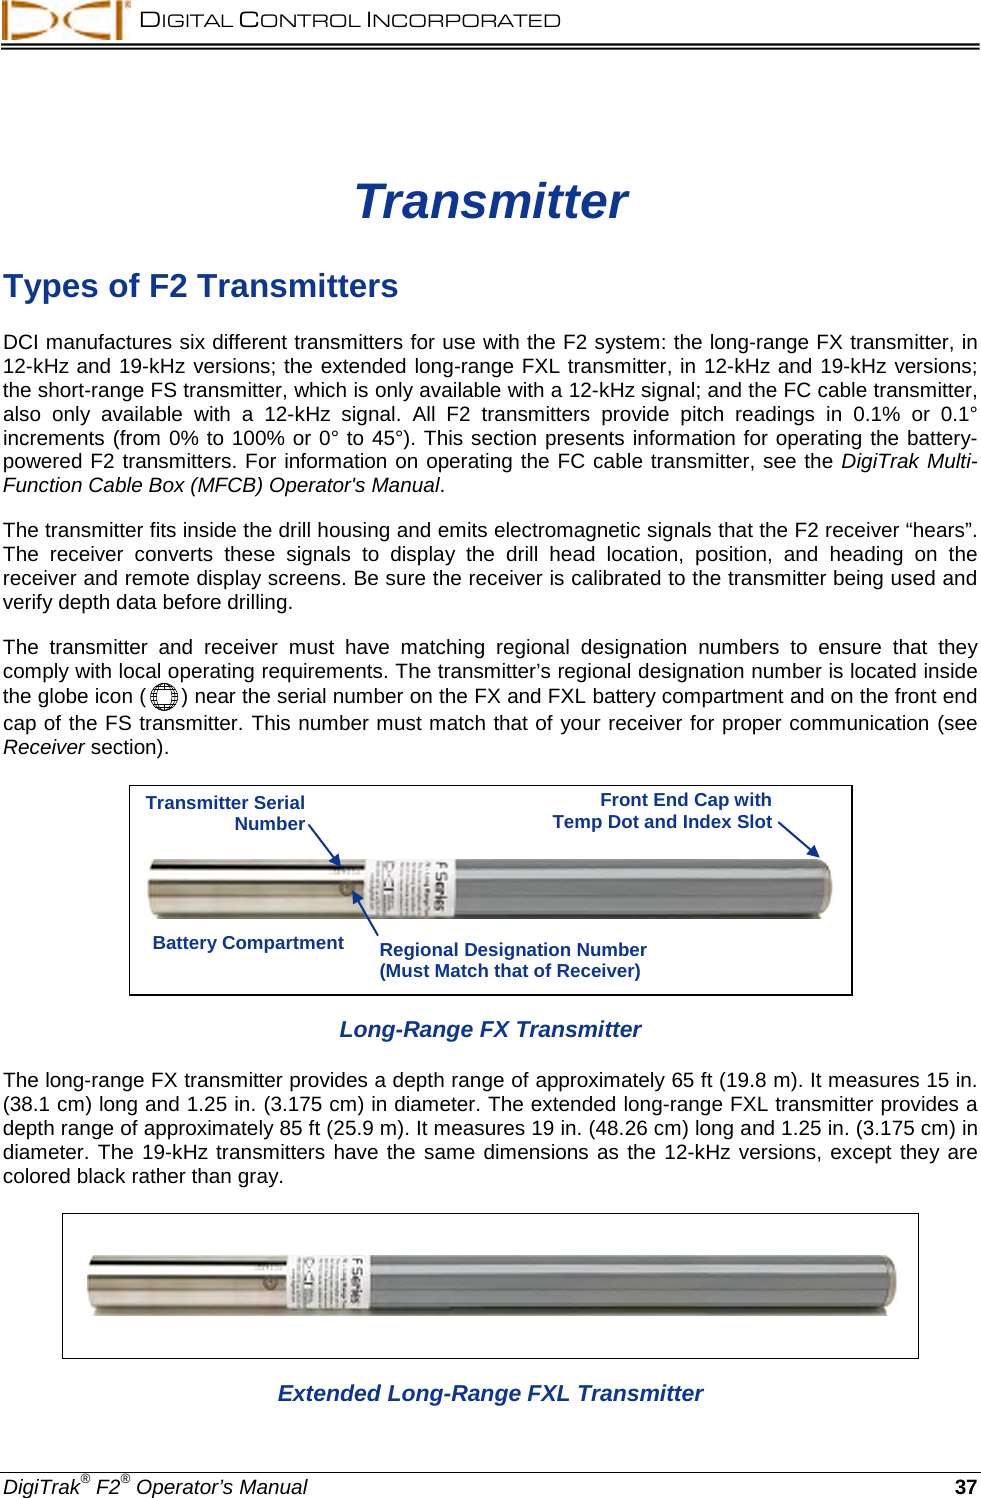  DIGITAL CONTROL INCORPORATED  DigiTrak® F2® Operator’s Manual 37 Transmitter Types of F2 Transmitters DCI manufactures six different transmitters for use with the F2 system: the long-range FX transmitter, in 12-kHz and 19-kHz versions; the extended long-range FXL transmitter, in 12-kHz and 19-kHz versions; the short-range FS transmitter, which is only available with a 12-kHz signal; and the FC cable transmitter, also only available with a 12-kHz signal.  All  F2  transmitters  provide pitch readings in  0.1% or 0.1° increments (from 0% to 100% or 0° to 45°). This section presents information for operating the battery-powered F2 transmitters. For information on operating the FC cable transmitter, see the DigiTrak Multi-Function Cable Box (MFCB) Operator&apos;s Manual. The transmitter fits inside the drill housing and emits electromagnetic signals that the F2 receiver “hears”. The receiver converts  these signals to display the drill head location, position, and heading on the receiver and remote display screens. Be sure the receiver is calibrated to the transmitter being used and verify depth data before drilling. The transmitter and receiver must have matching regional  designation numbers to ensure that they comply with local operating requirements. The transmitter’s regional designation number is located inside the globe icon (  ) near the serial number on the FX and FXL battery compartment and on the front end cap of the FS transmitter. This number must match that of your receiver for proper communication (see Receiver section).  Long-Range FX Transmitter The long-range FX transmitter provides a depth range of approximately 65 ft (19.8 m). It measures 15 in. (38.1 cm) long and 1.25 in. (3.175 cm) in diameter. The extended long-range FXL transmitter provides a depth range of approximately 85 ft (25.9 m). It measures 19 in. (48.26 cm) long and 1.25 in. (3.175 cm) in diameter. The 19-kHz transmitters have the same dimensions as the 12-kHz versions, except they are colored black rather than gray.  Extended Long-Range FXL Transmitter Transmitter Serial Number Regional Designation Number (Must Match that of Receiver) Battery Compartment Front End Cap with Temp Dot and Index Slot 